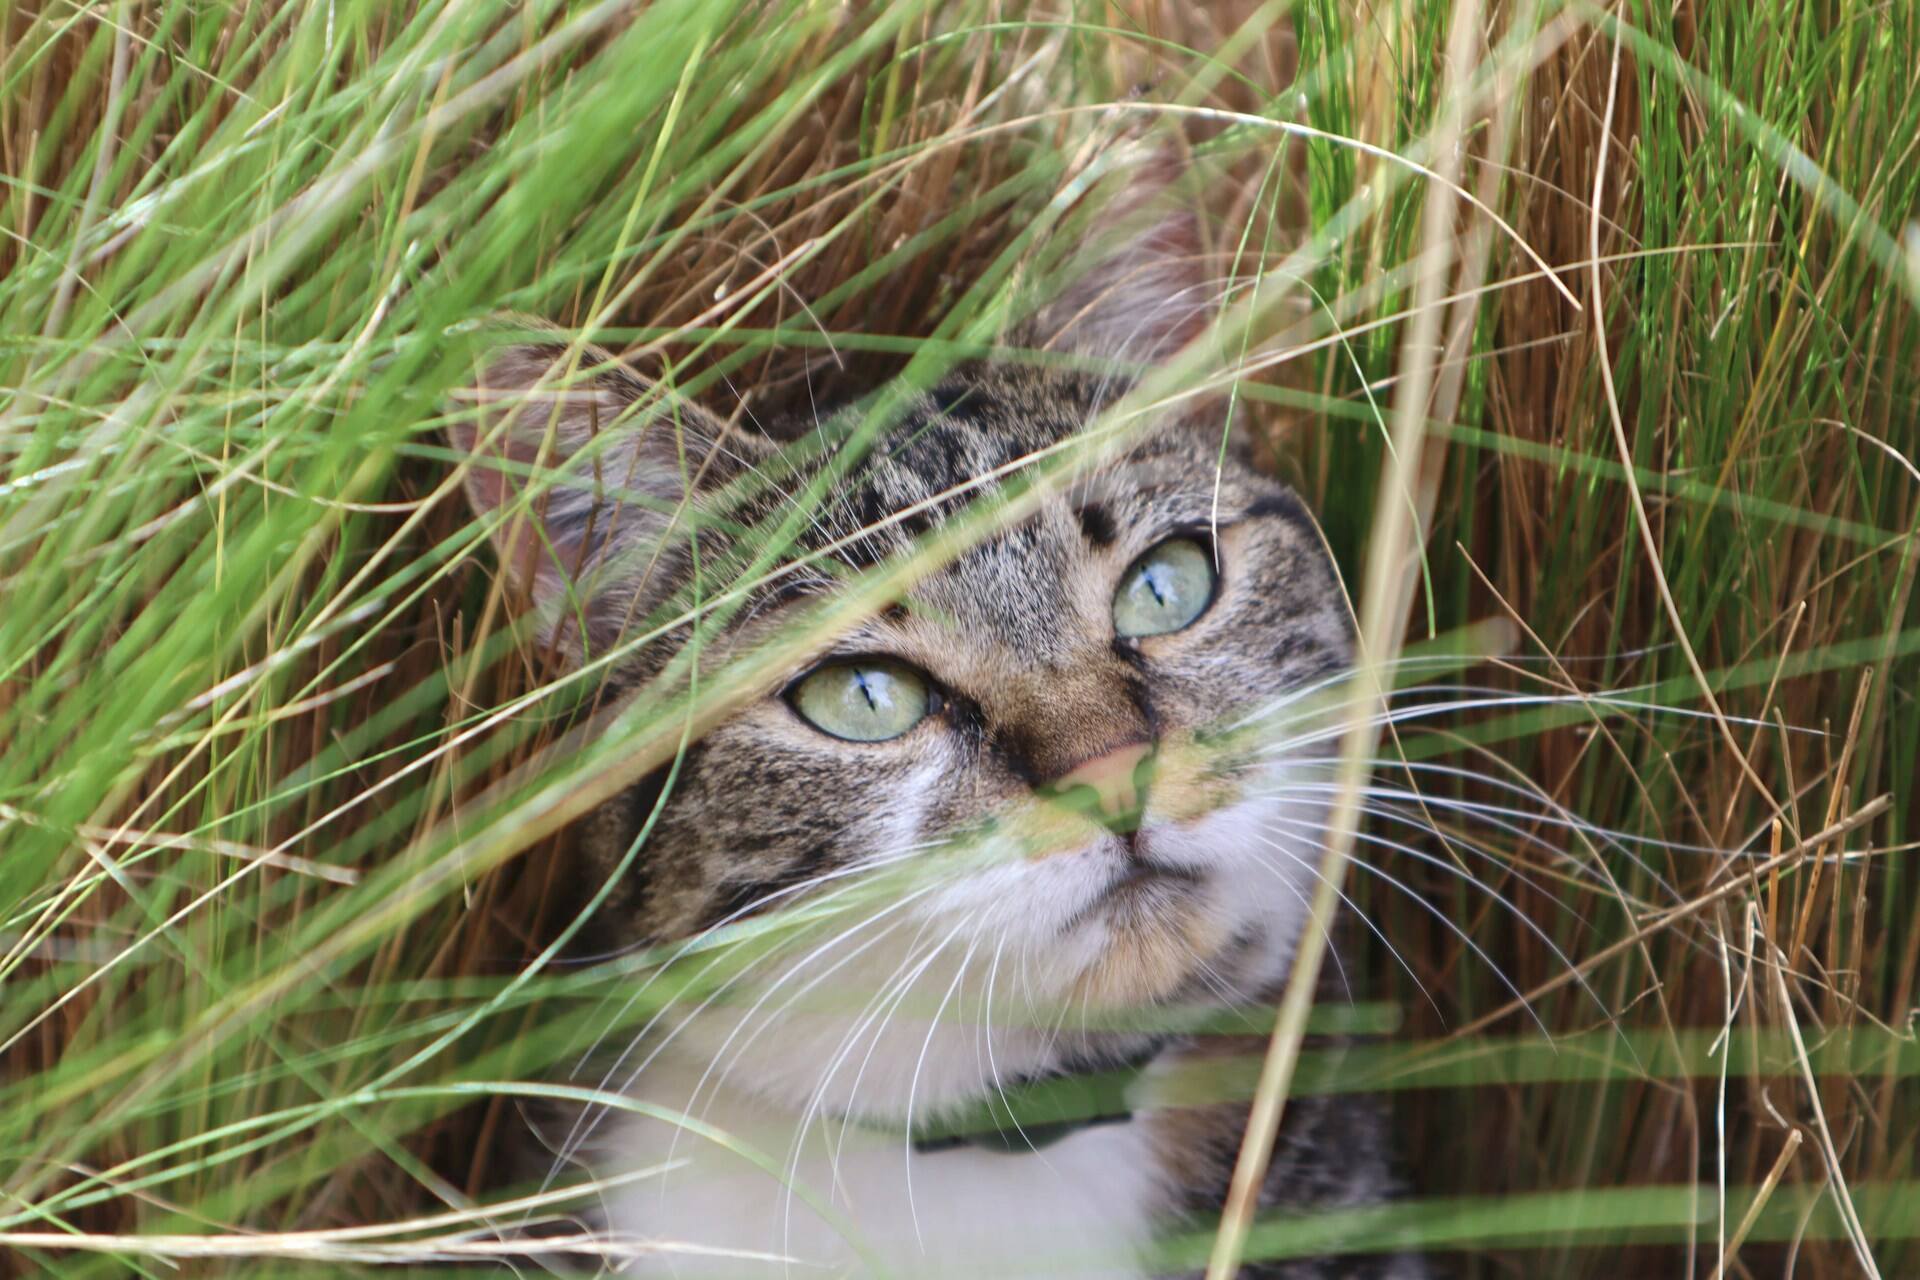 An outdoor cat exploring a grassy patch